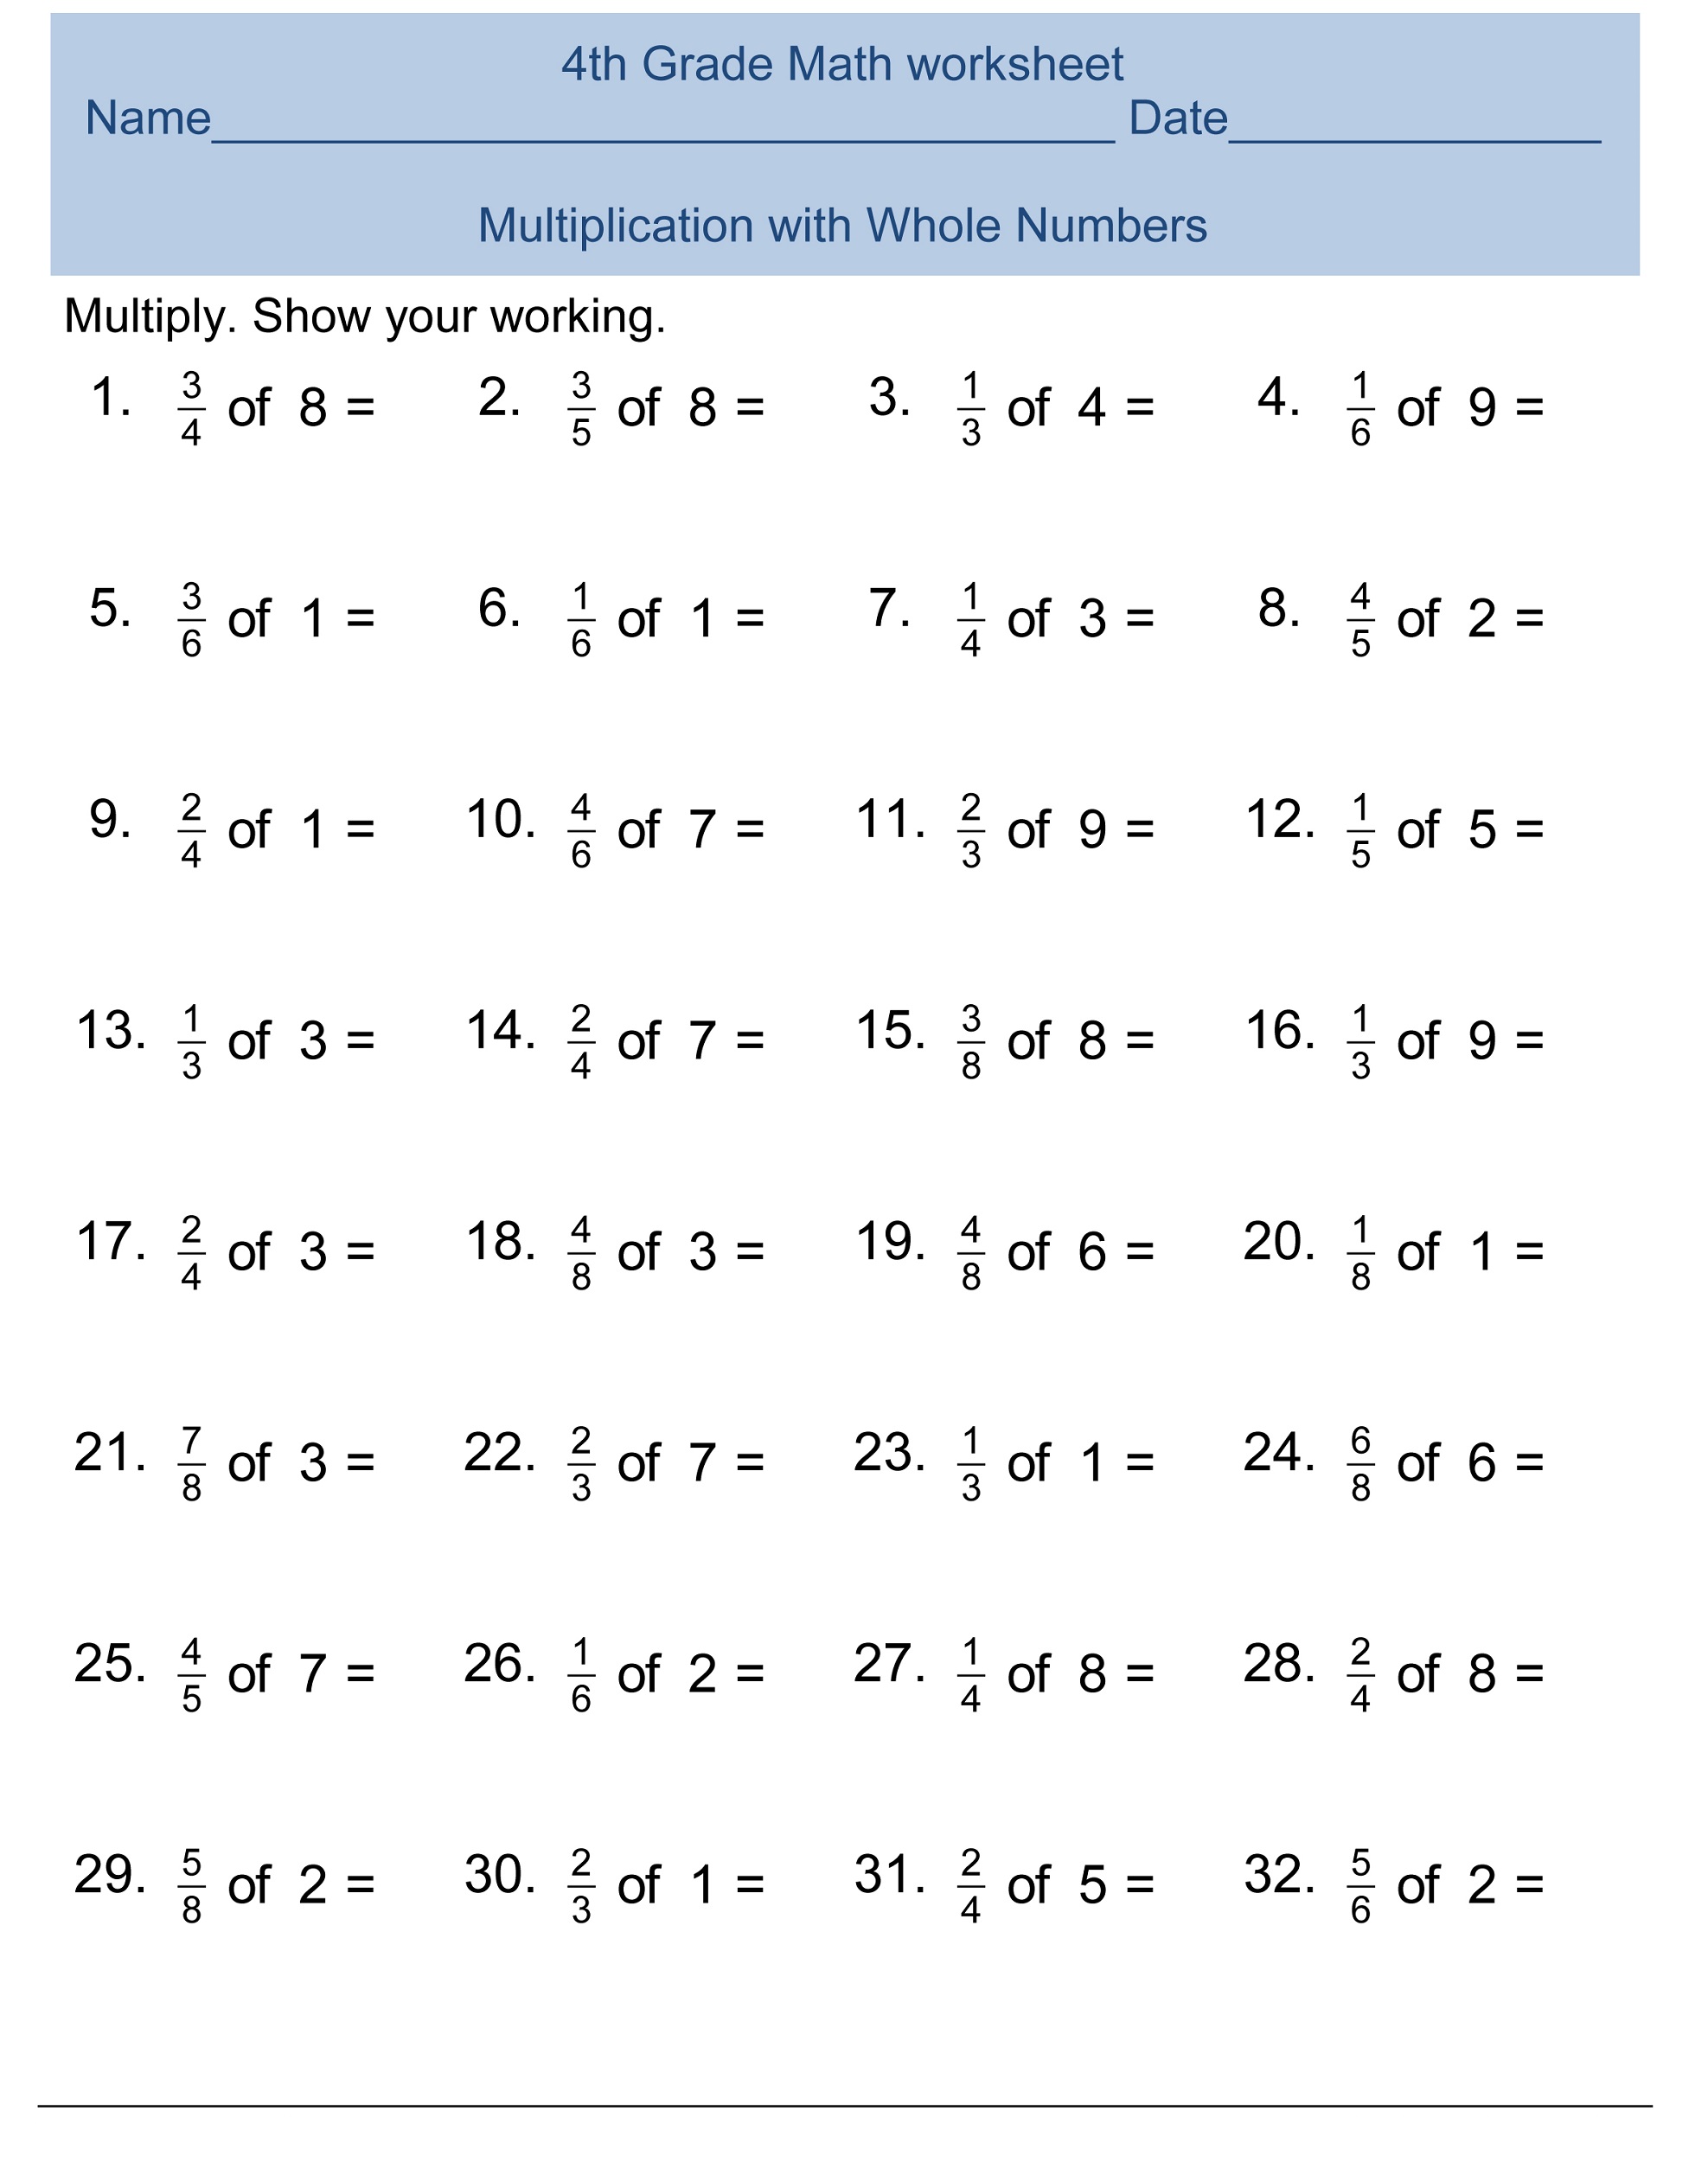 4th-grade-math-worksheets-best-coloring-pages-for-kids-free-4th-grade-math-worksheets-activity